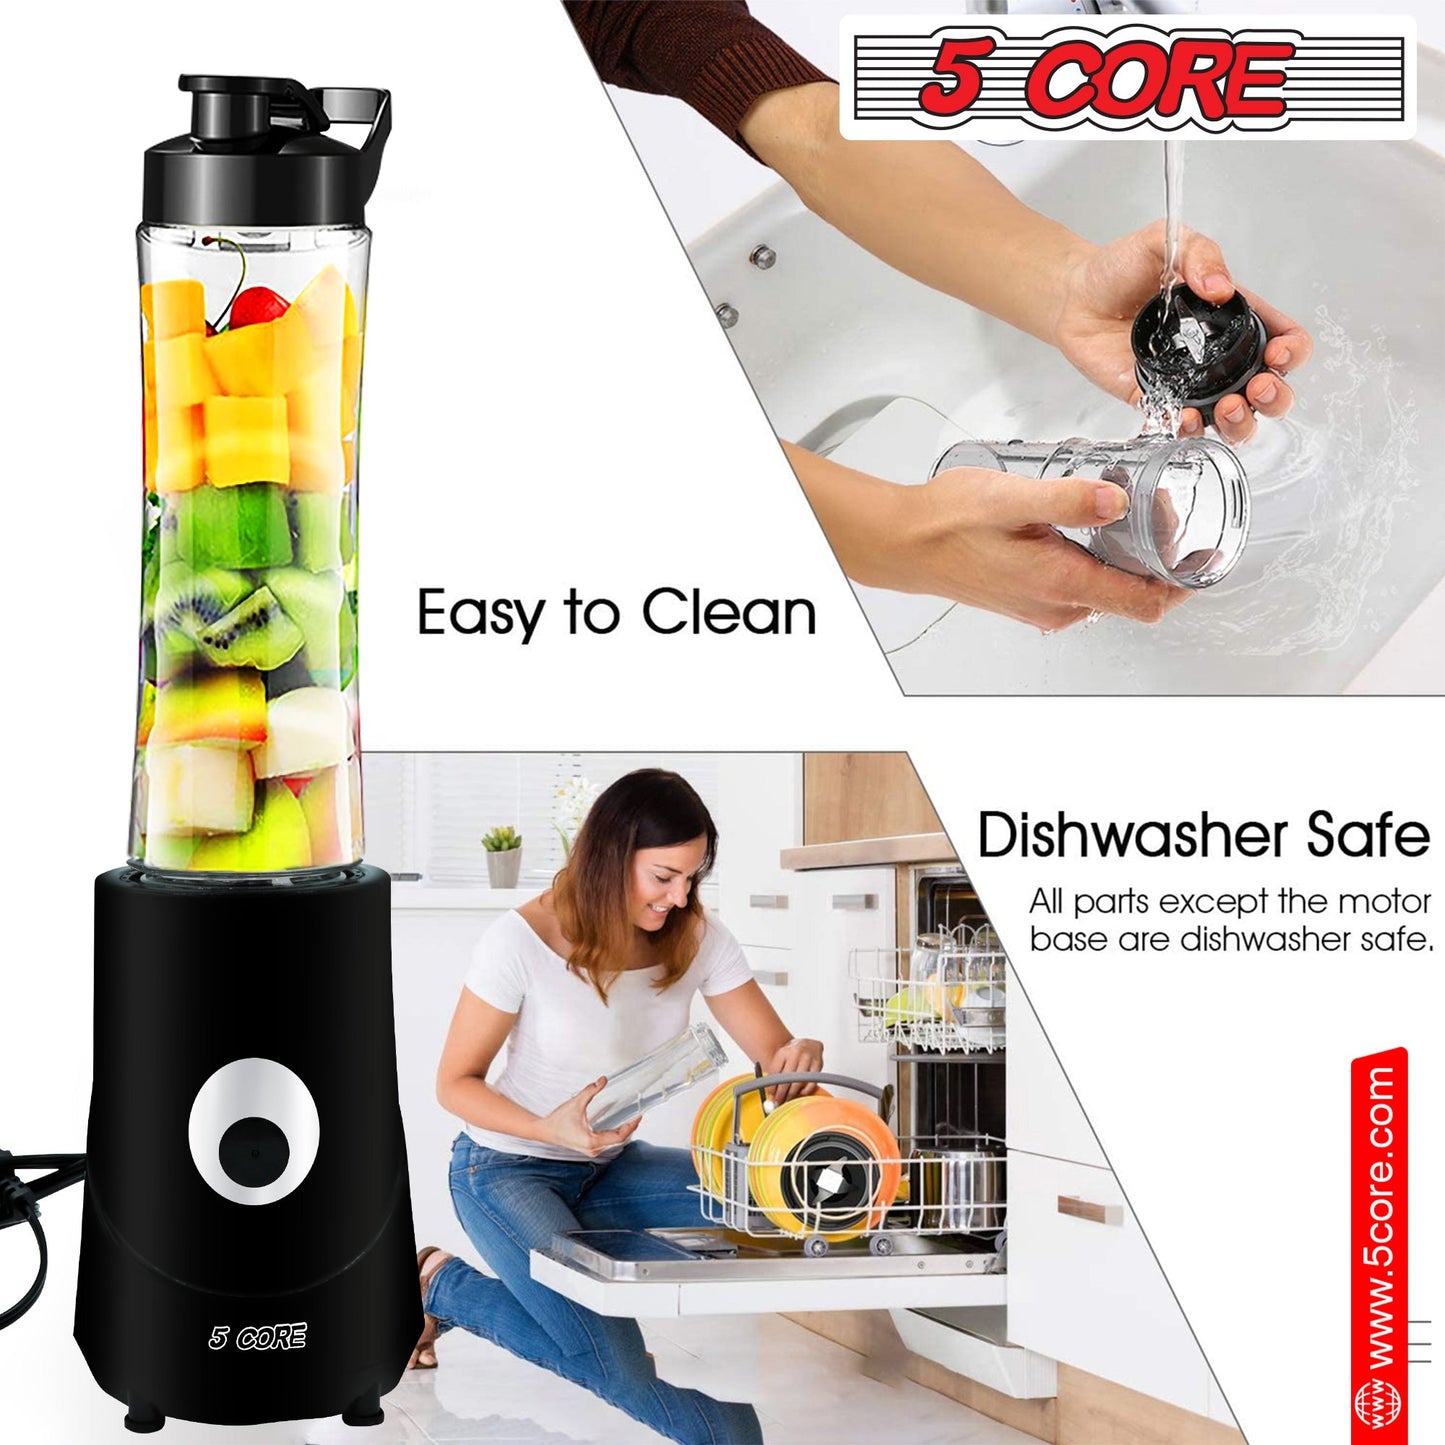 5Core Portable Blender For Kitchen 20 Oz Capacity 160W Personal